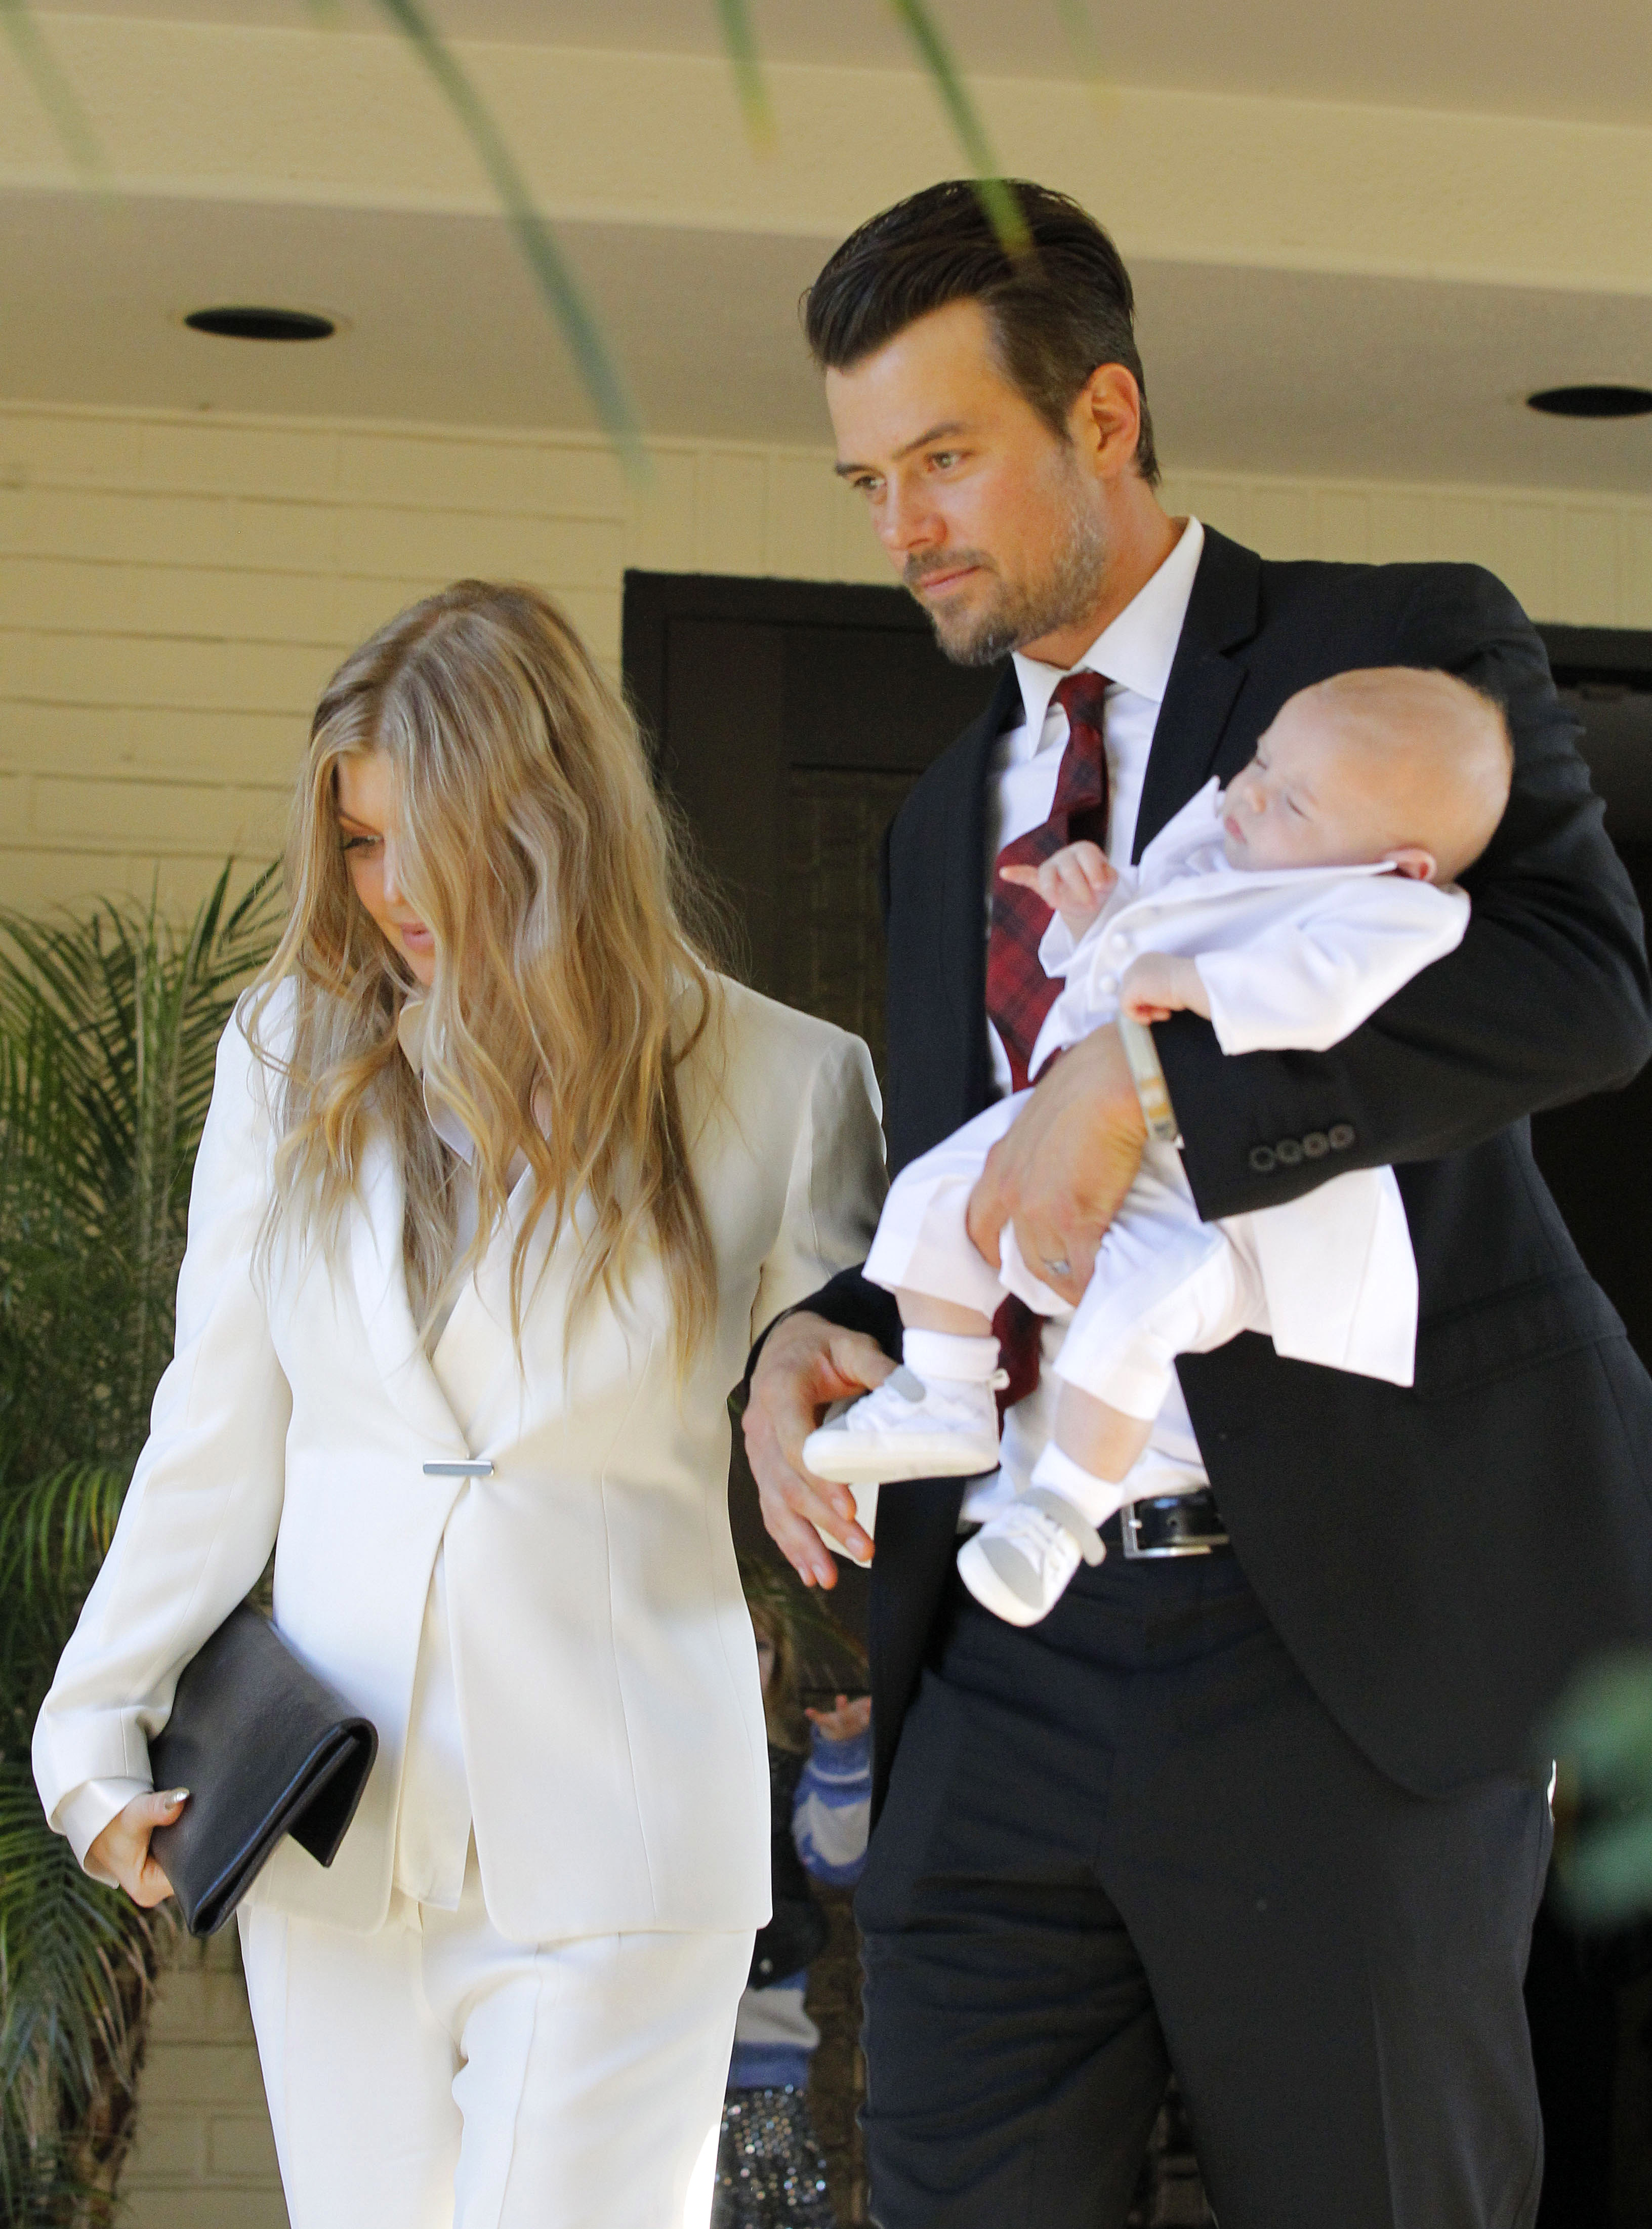 Fergie and Josh Duhamel with their son Axl Duhamel pictured on December 12, 2013 in Los Angeles, California | Source: Getty Images